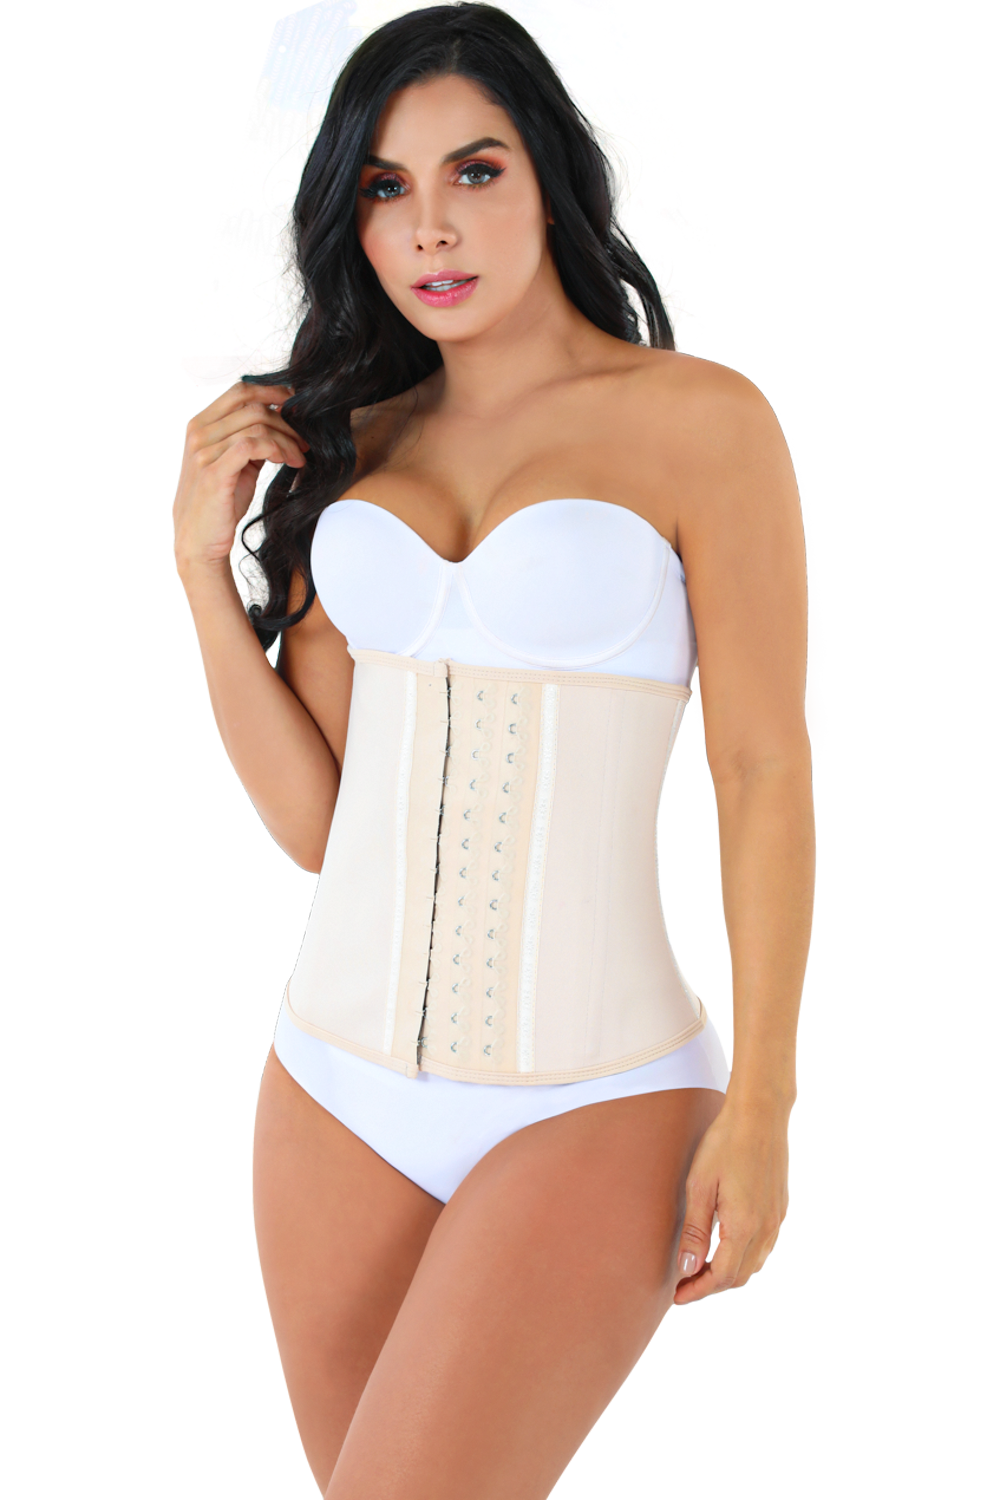 Strapless Post-Surgical Shapewear | Colombian Girdles